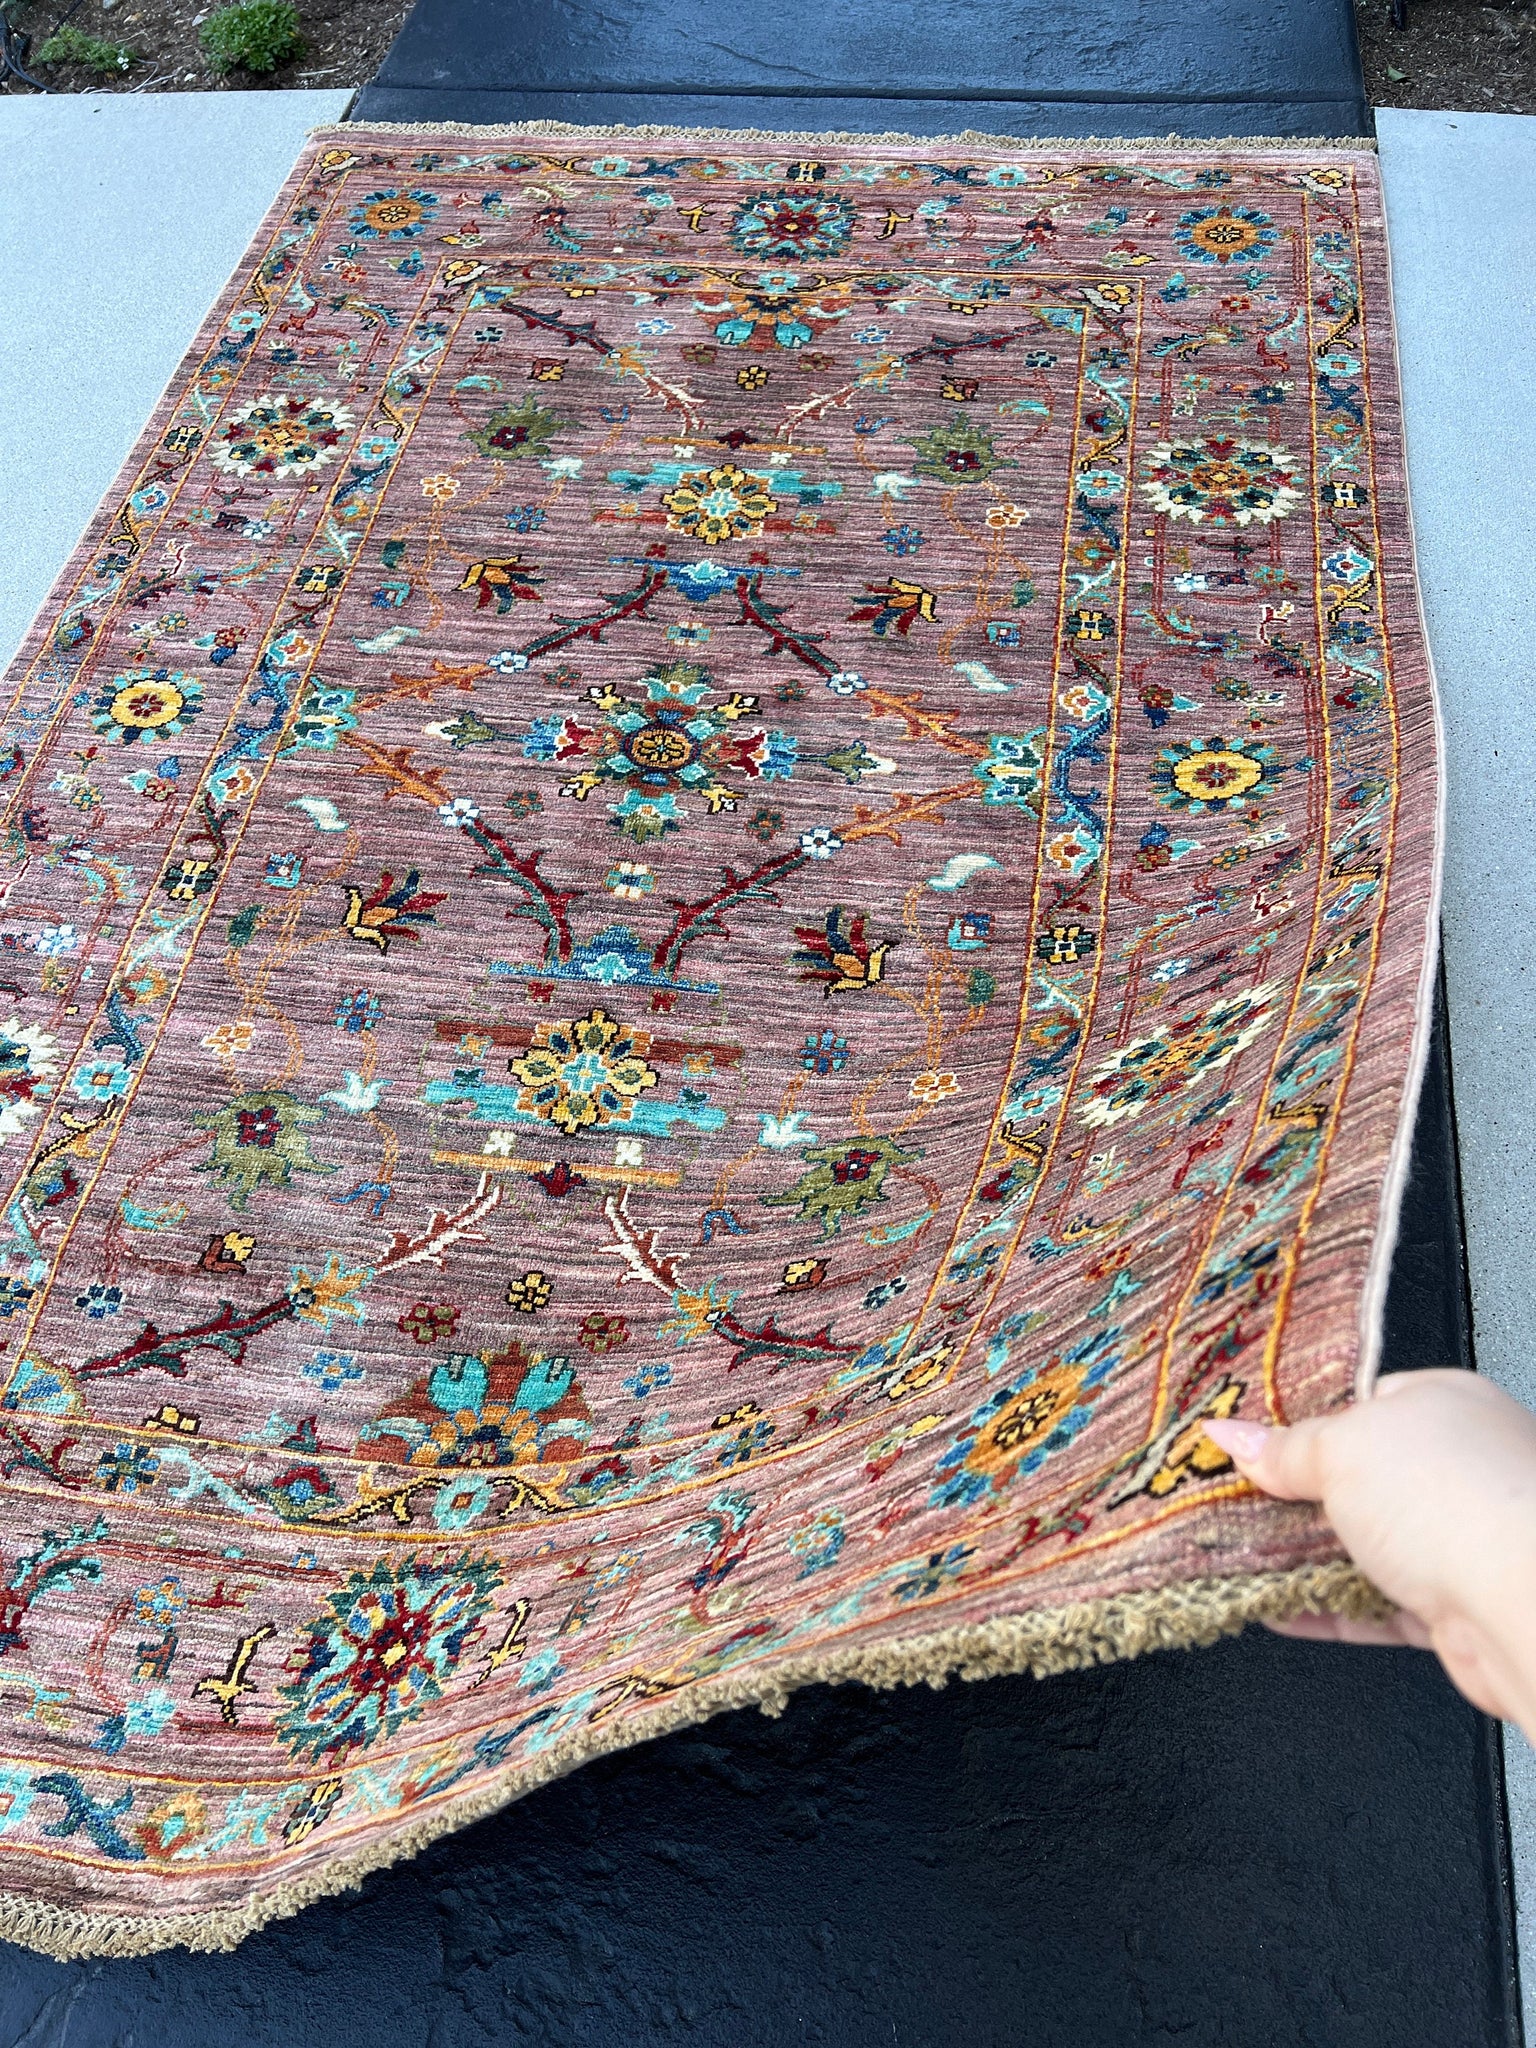 4x6 (120x185) Fair Trade Handmade Afghan Rug | Mauve Turquoise Caramel Gold Rust Brown Navy Blue Ivory | Wool Boho Bohemian Floral Knotted